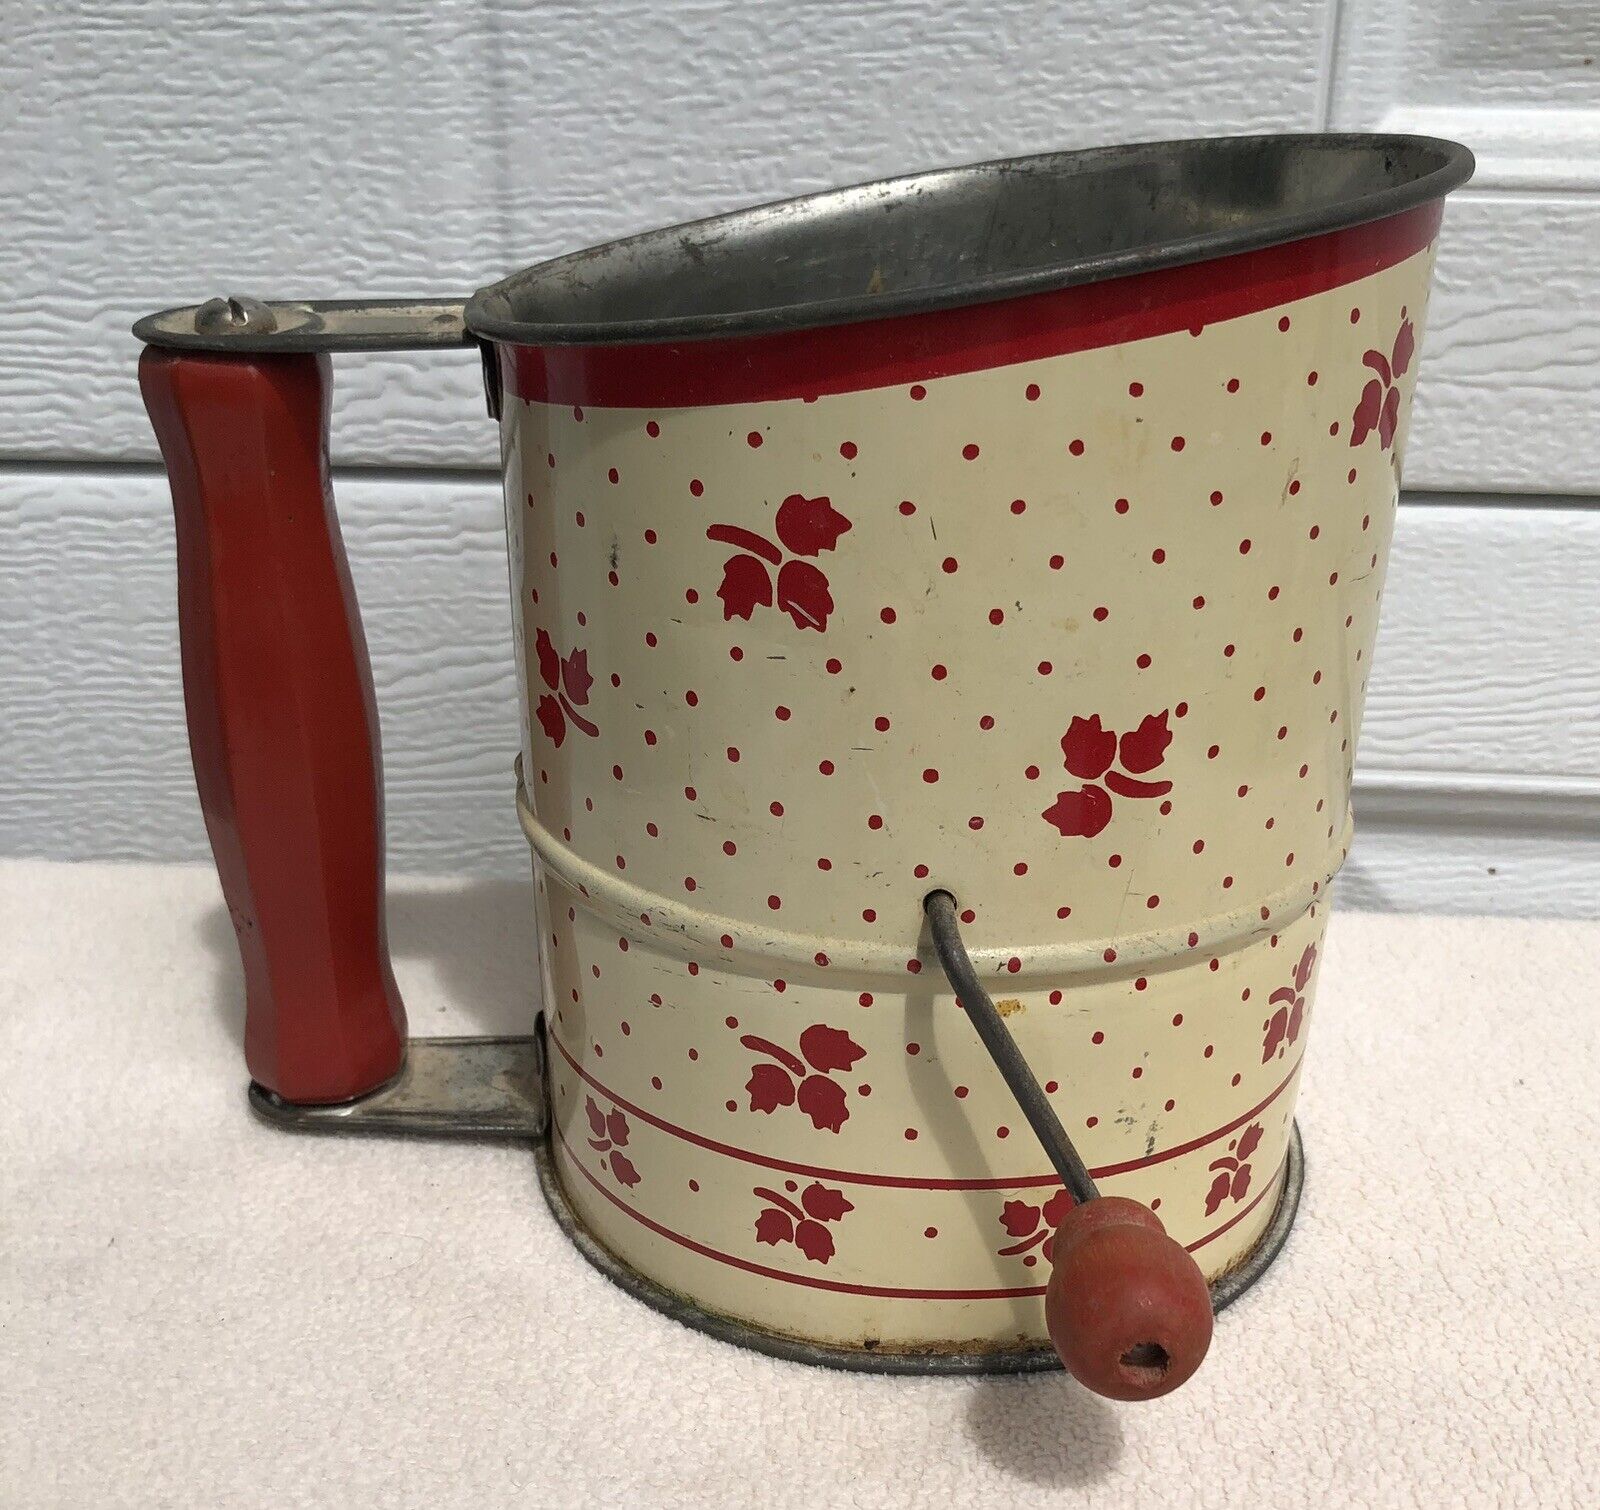 Vintage 1930's Large Size Flour Sifter with Red Wood Handle and Knob Poppies